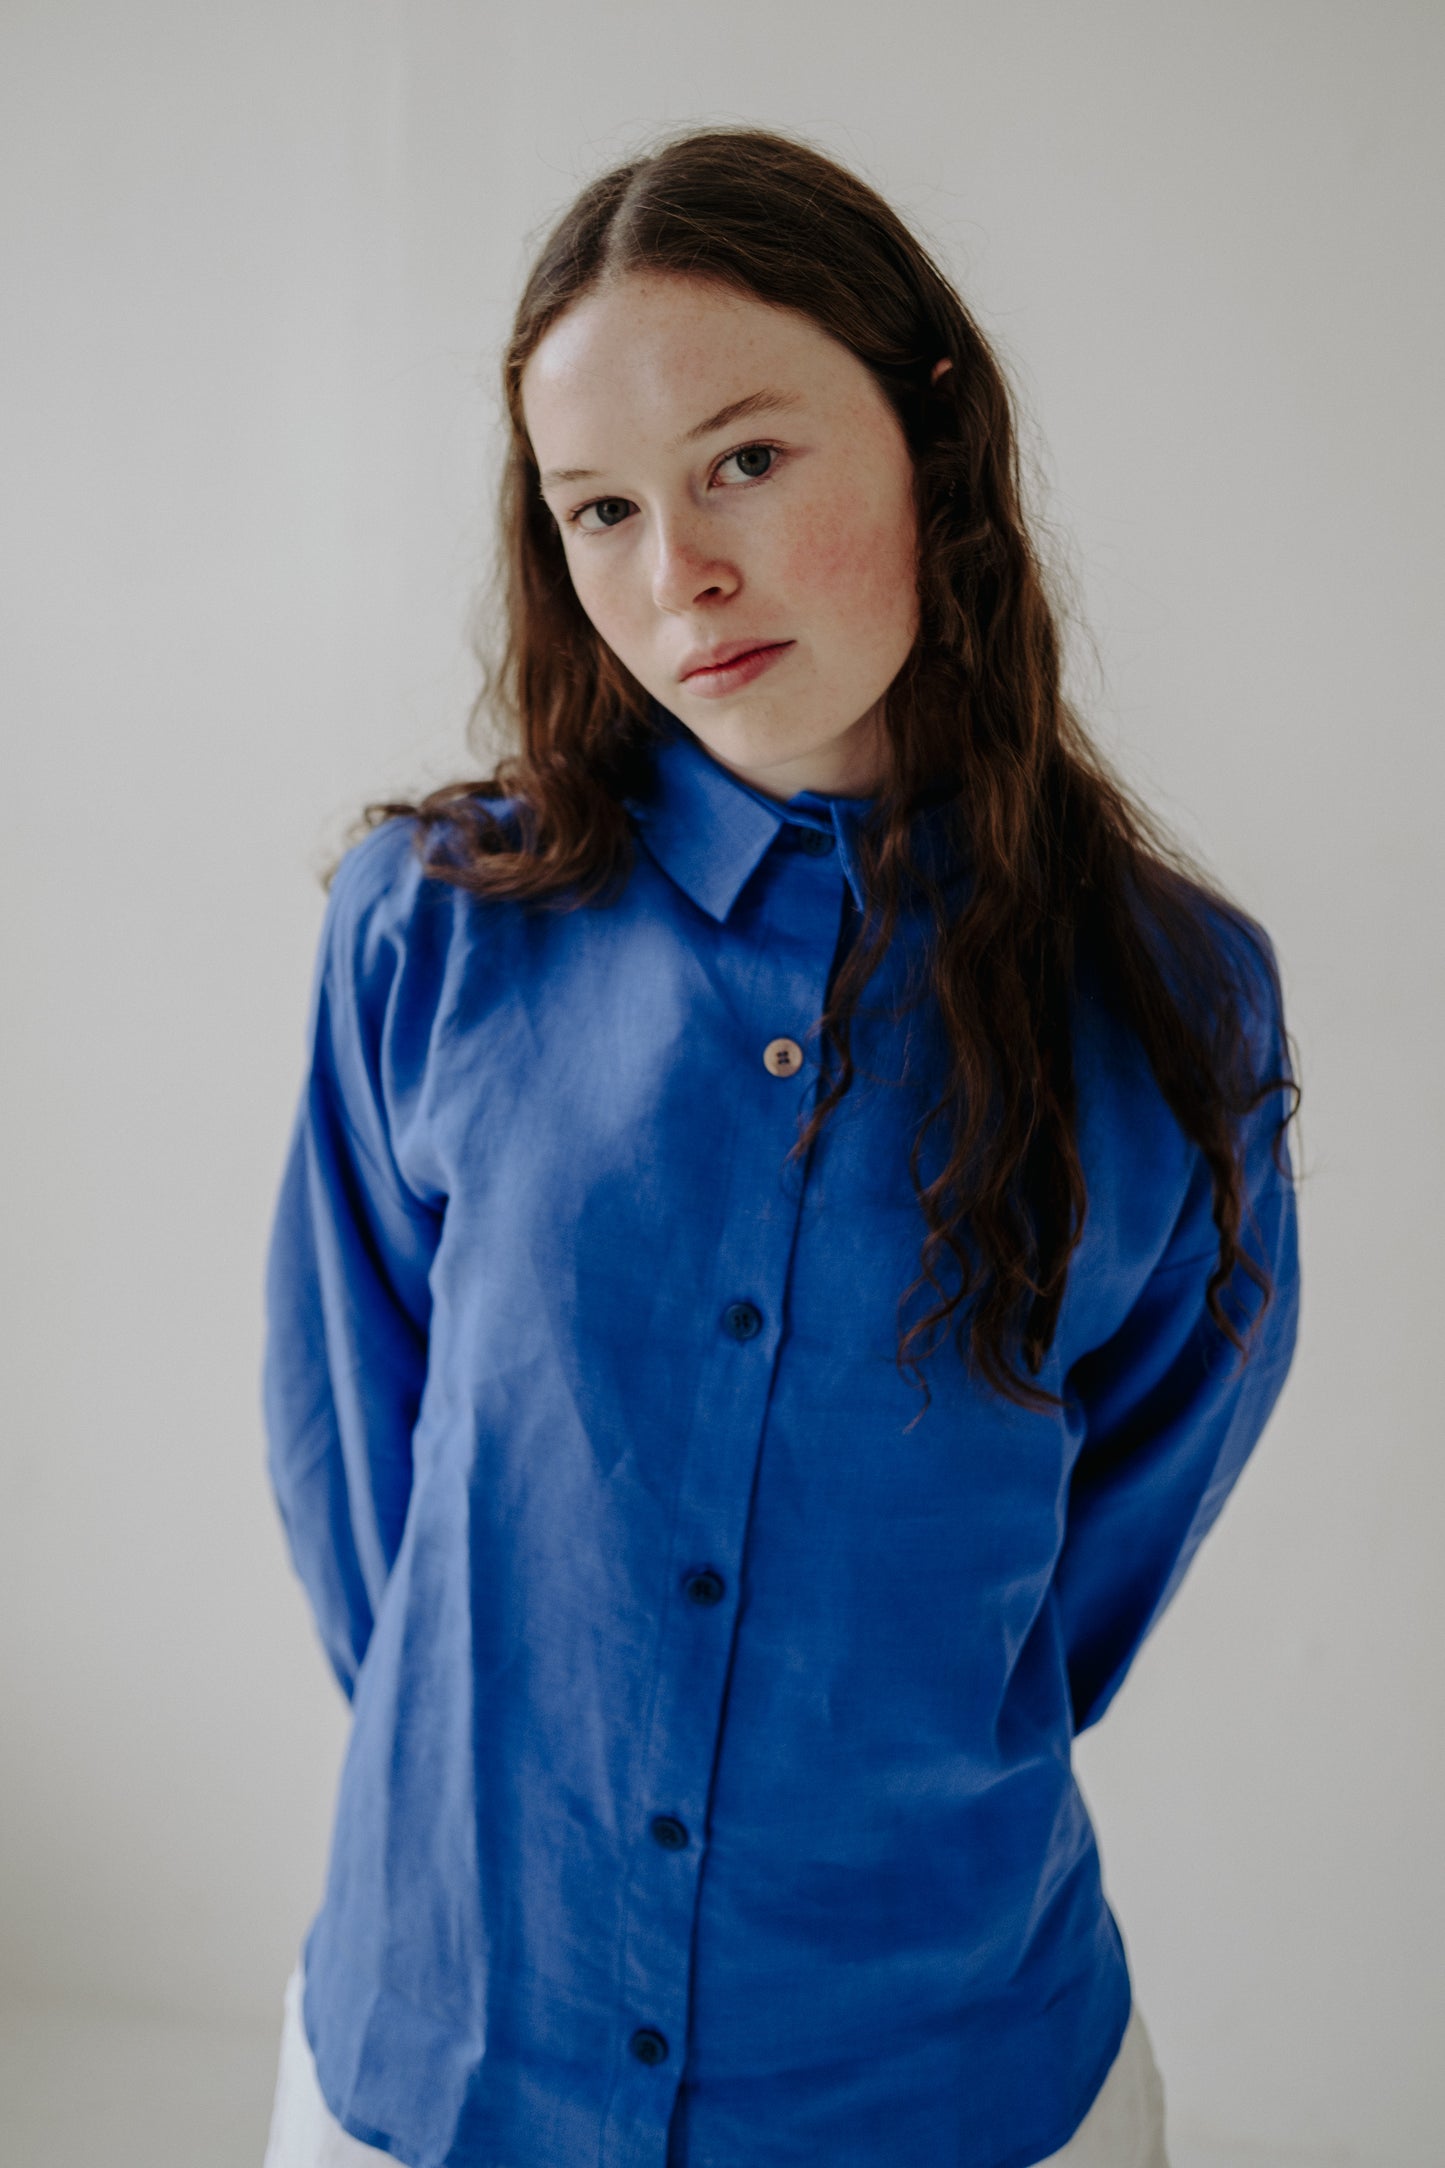 BLUEBELL BLOUSE | The summer blues we are okay with... Add a pop of colour to your summer wardrobe with our new Bluebell blouse. The sillouhette is a cross between our Willow and signature Cadhla blouse - loose and flowy with volumous sleeves and curved c